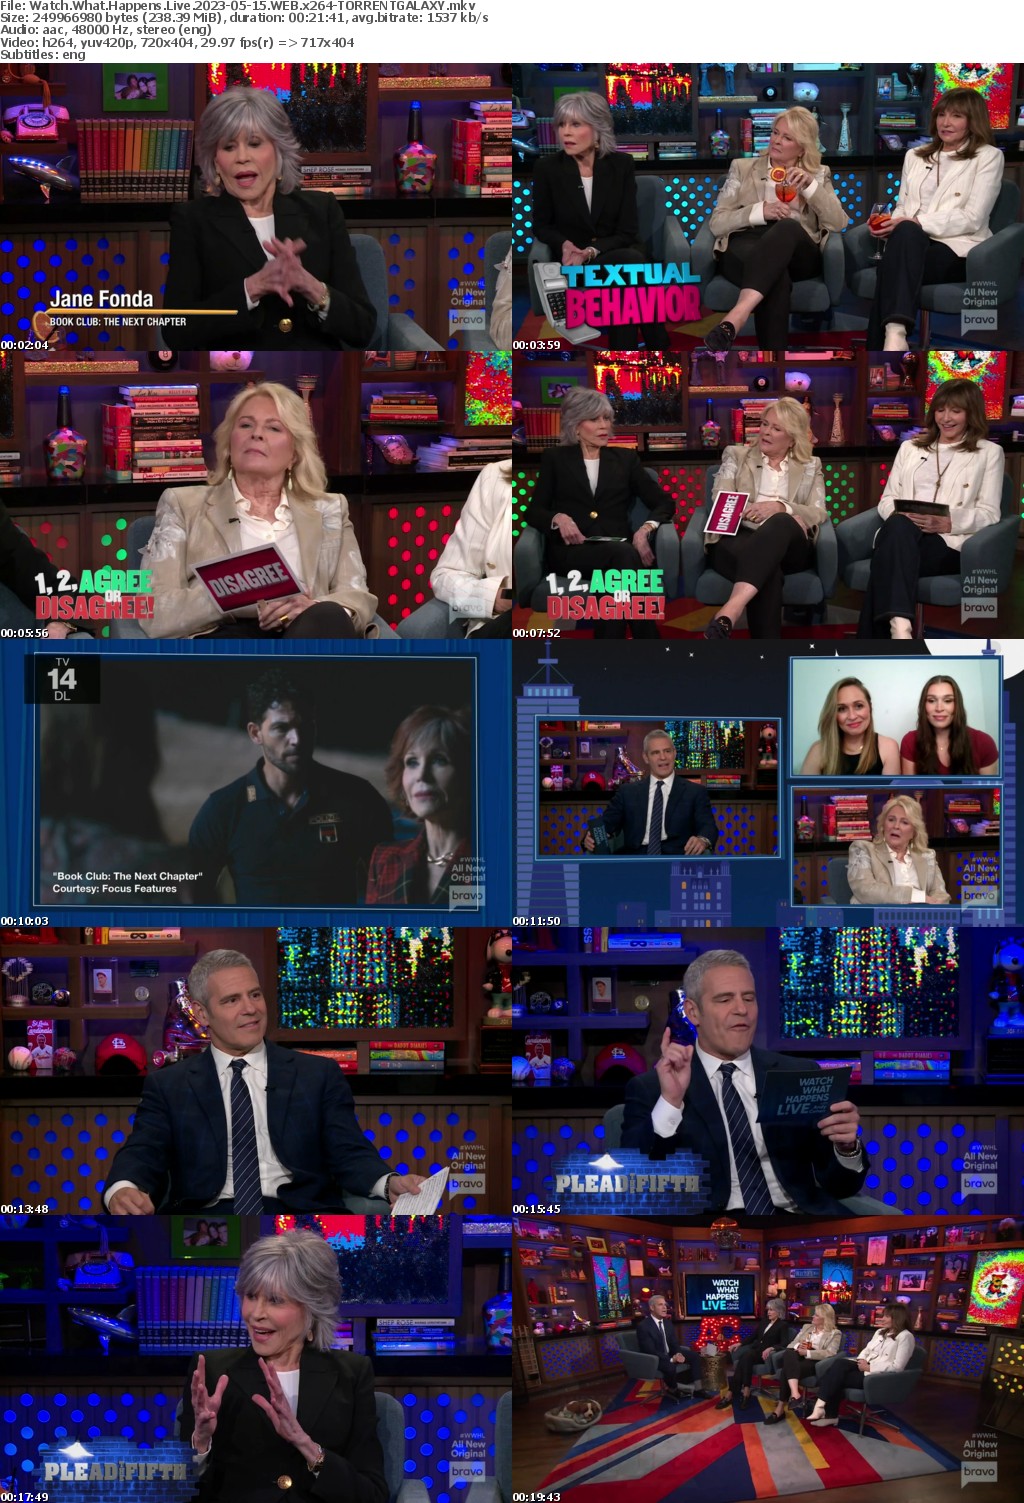 Watch What Happens Live 2023-05-15 WEB x264-GALAXY